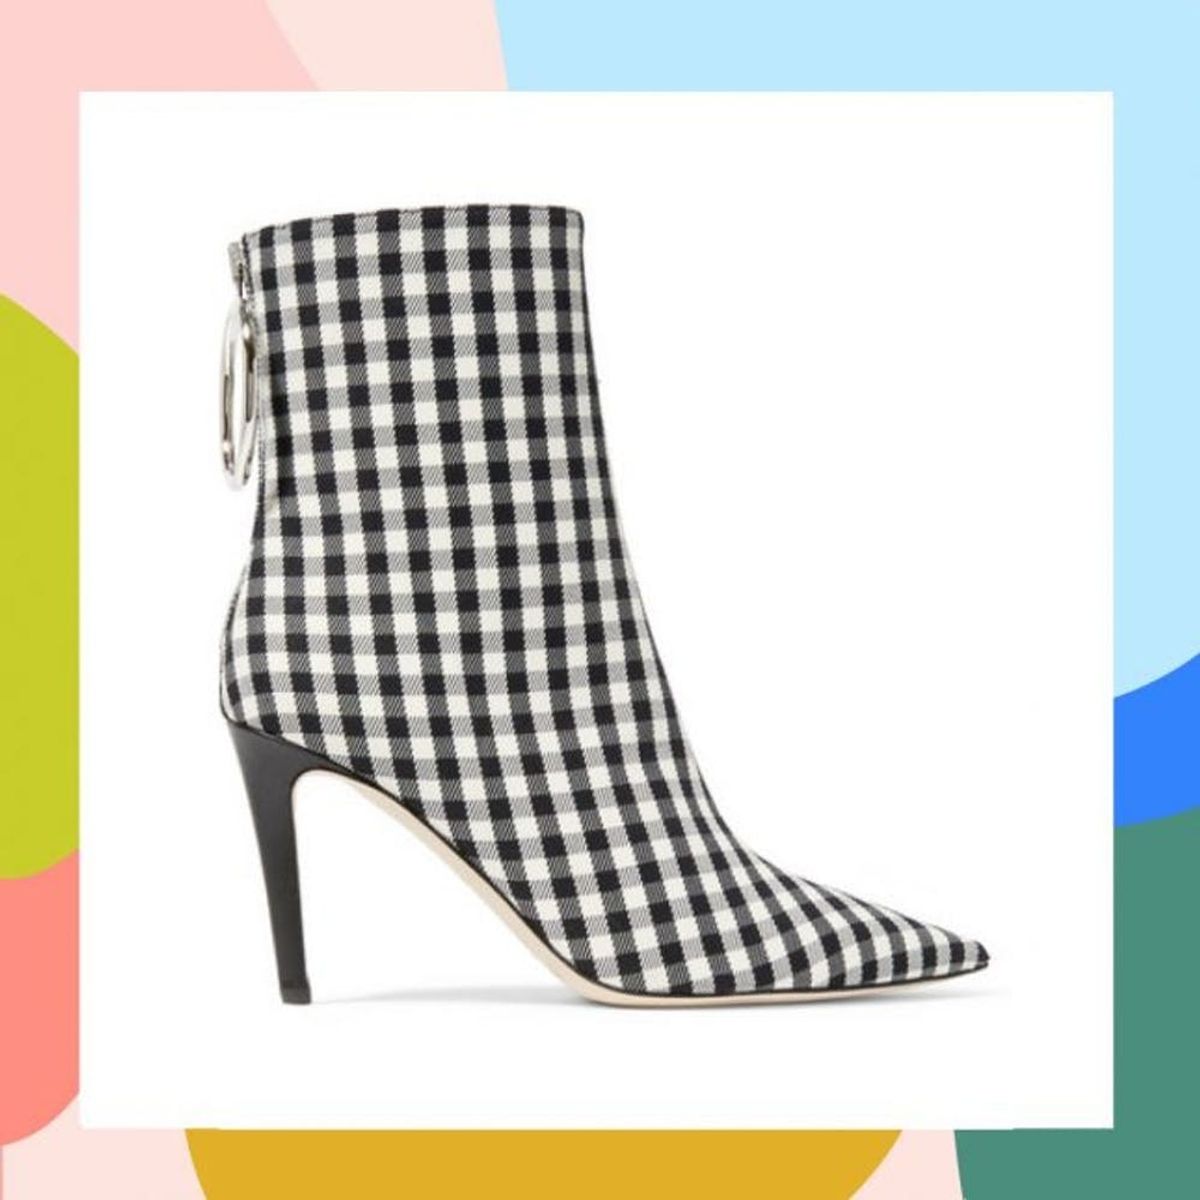 Treat Yourself to These 9 Spring Must-Haves from Net-a-Porter’s Sale